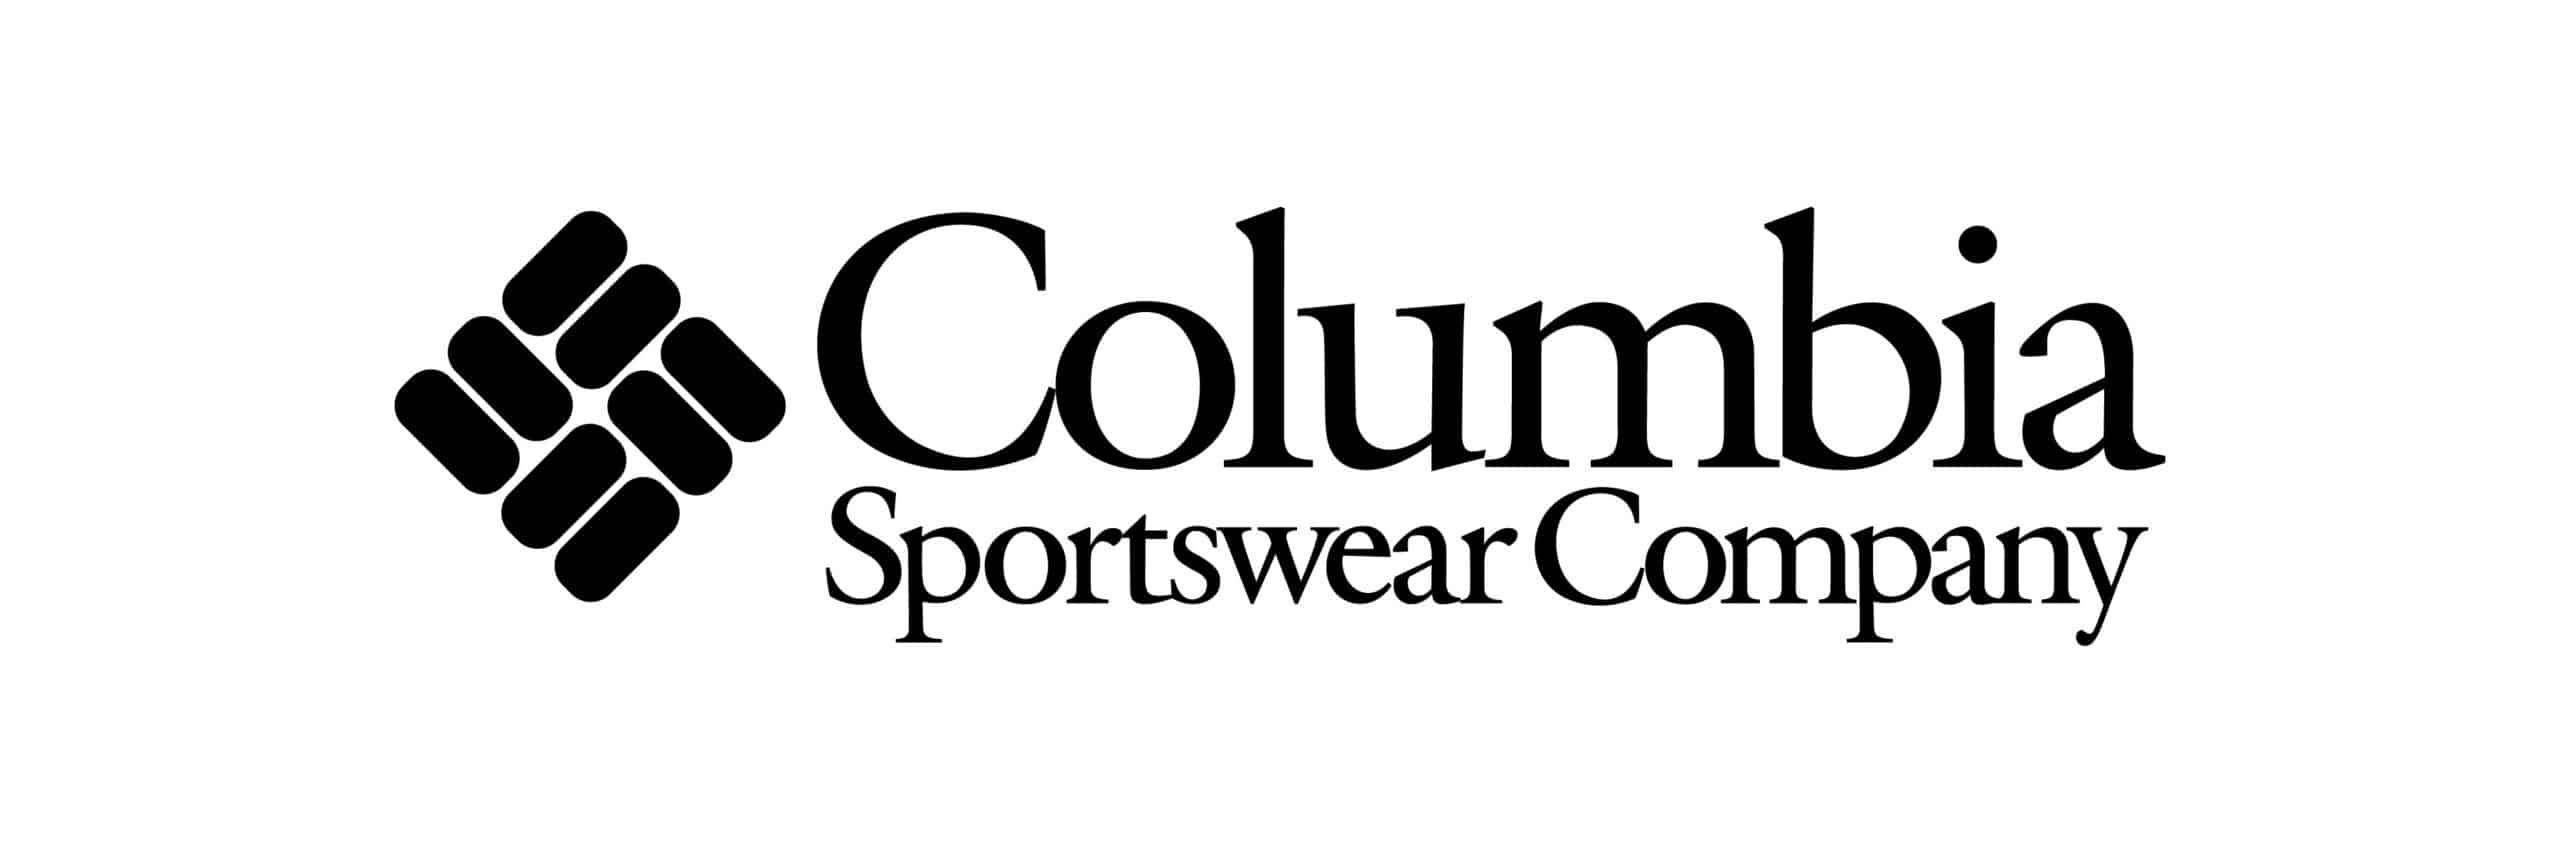 Columbia Sportswear Curtis Wright Outfitters Curtis Wright Outfitters